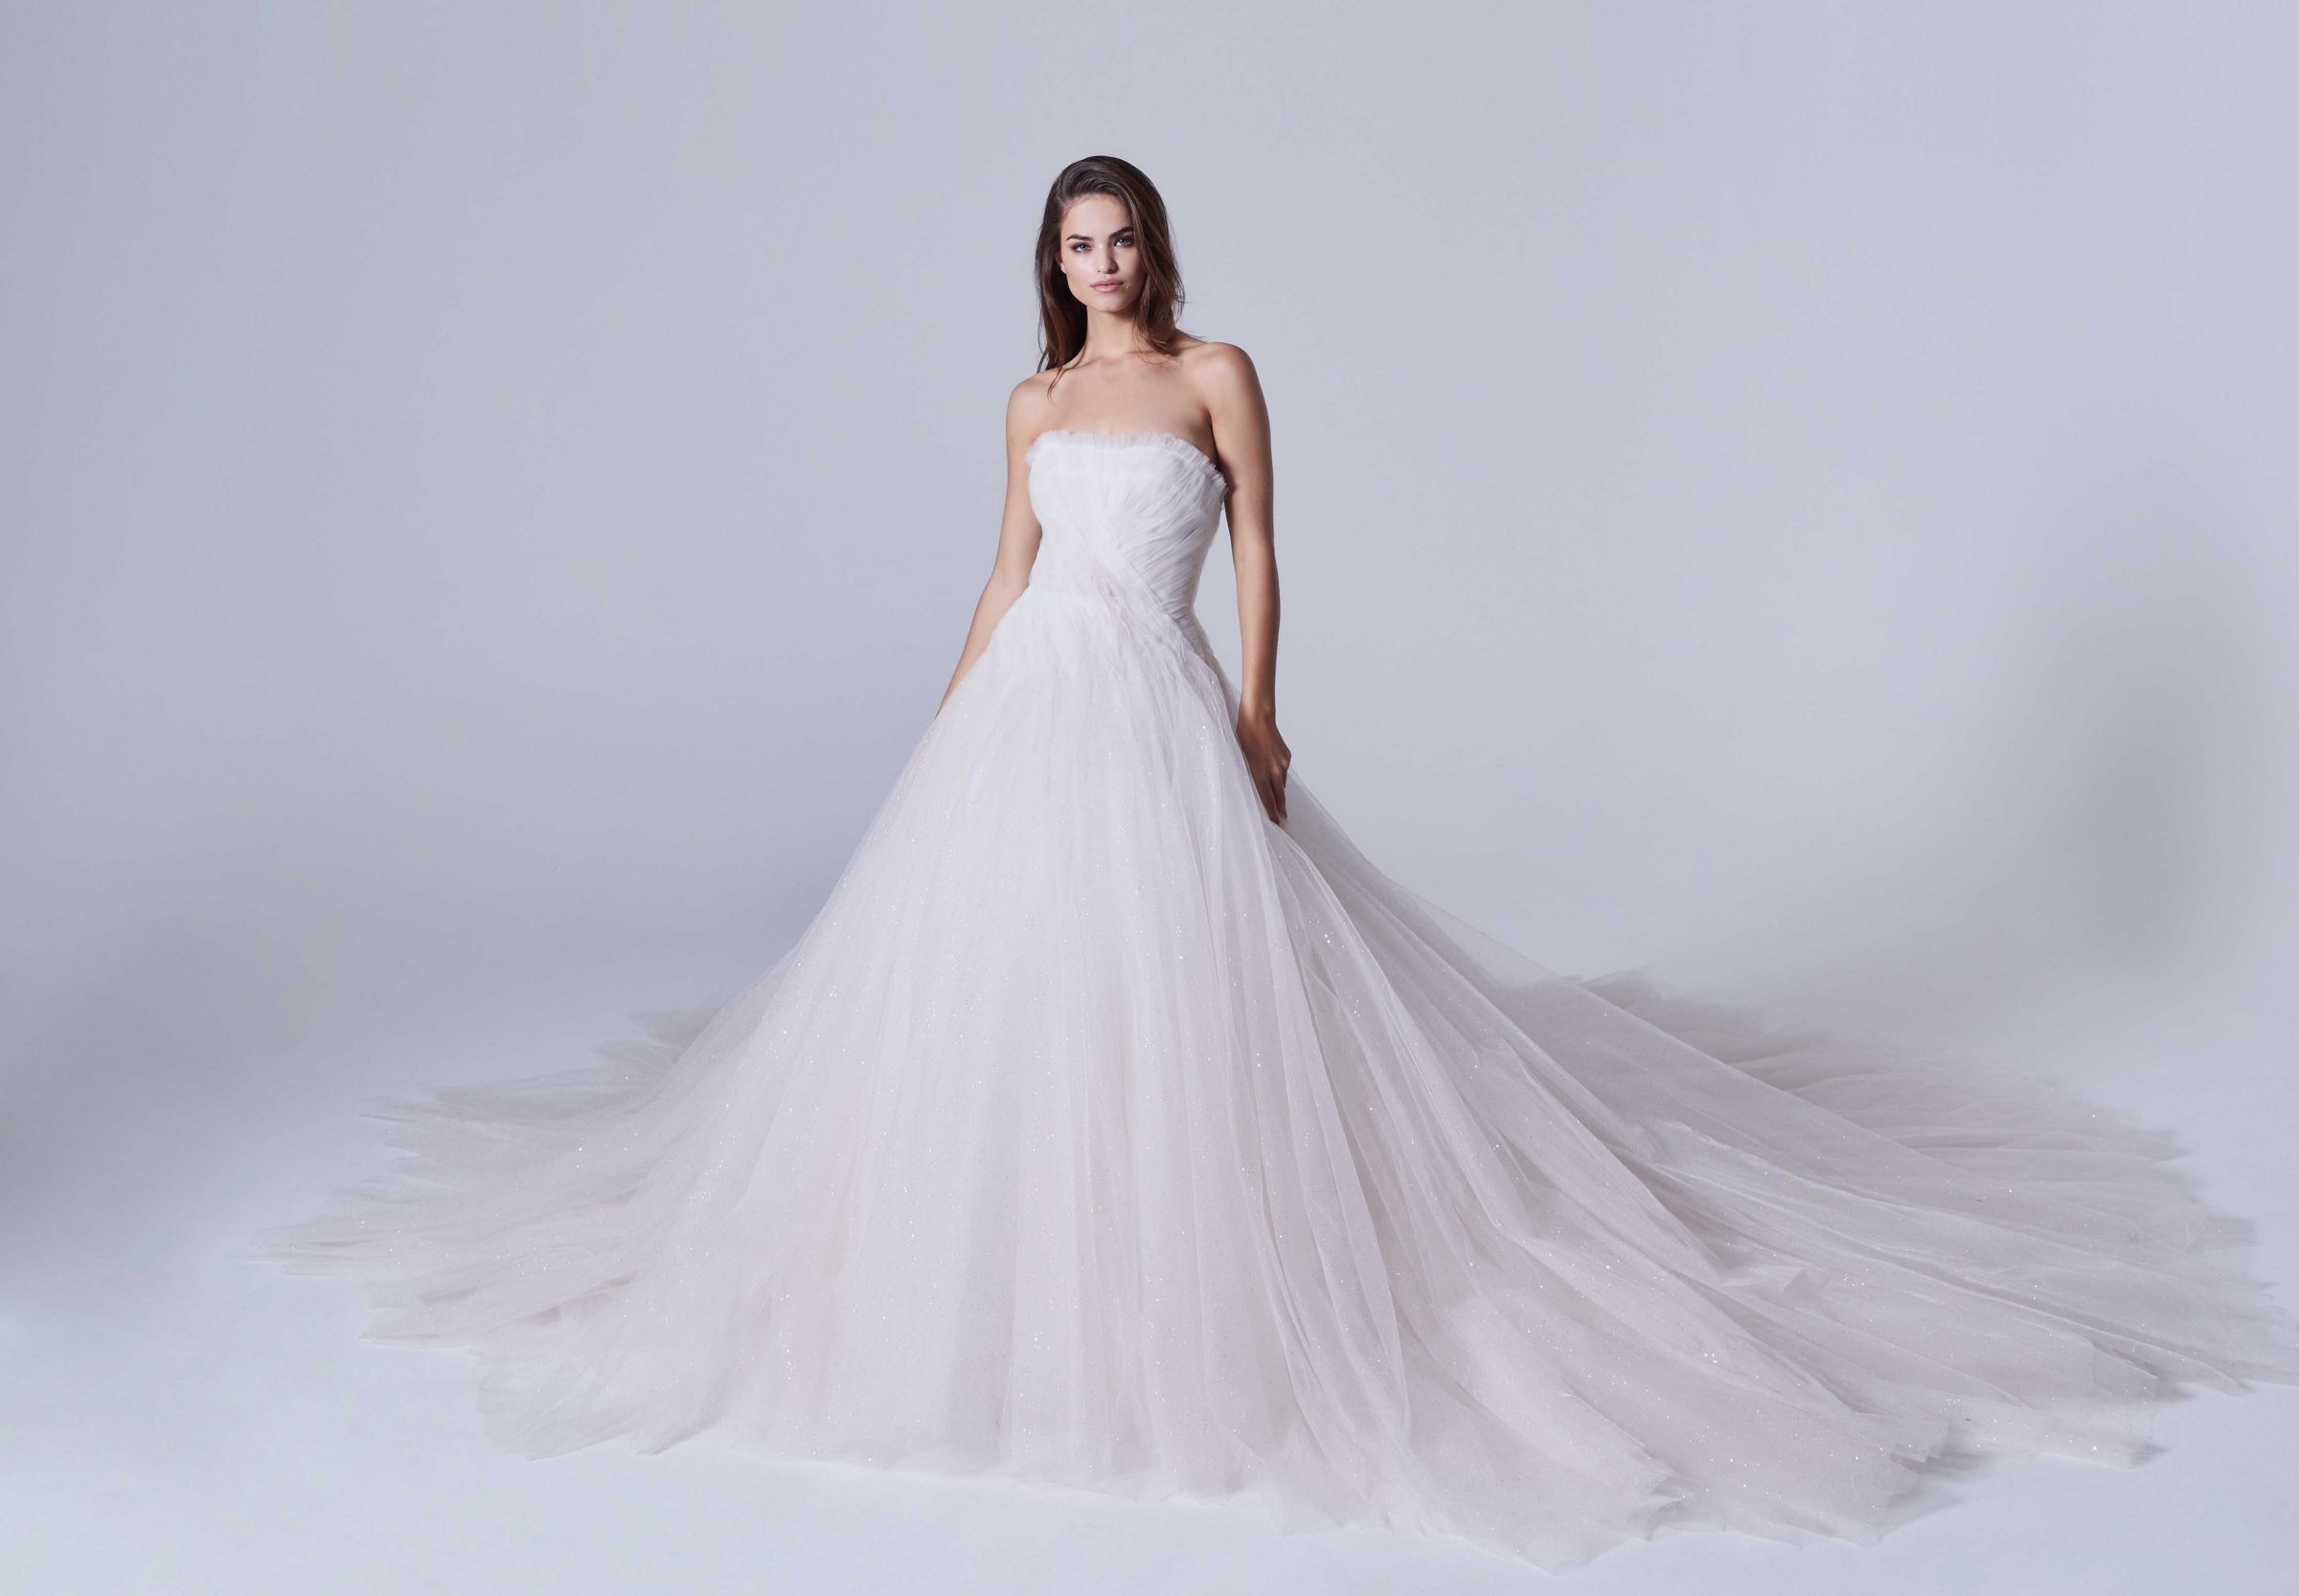 Strapless wedding ballgown made of sparkly tulle